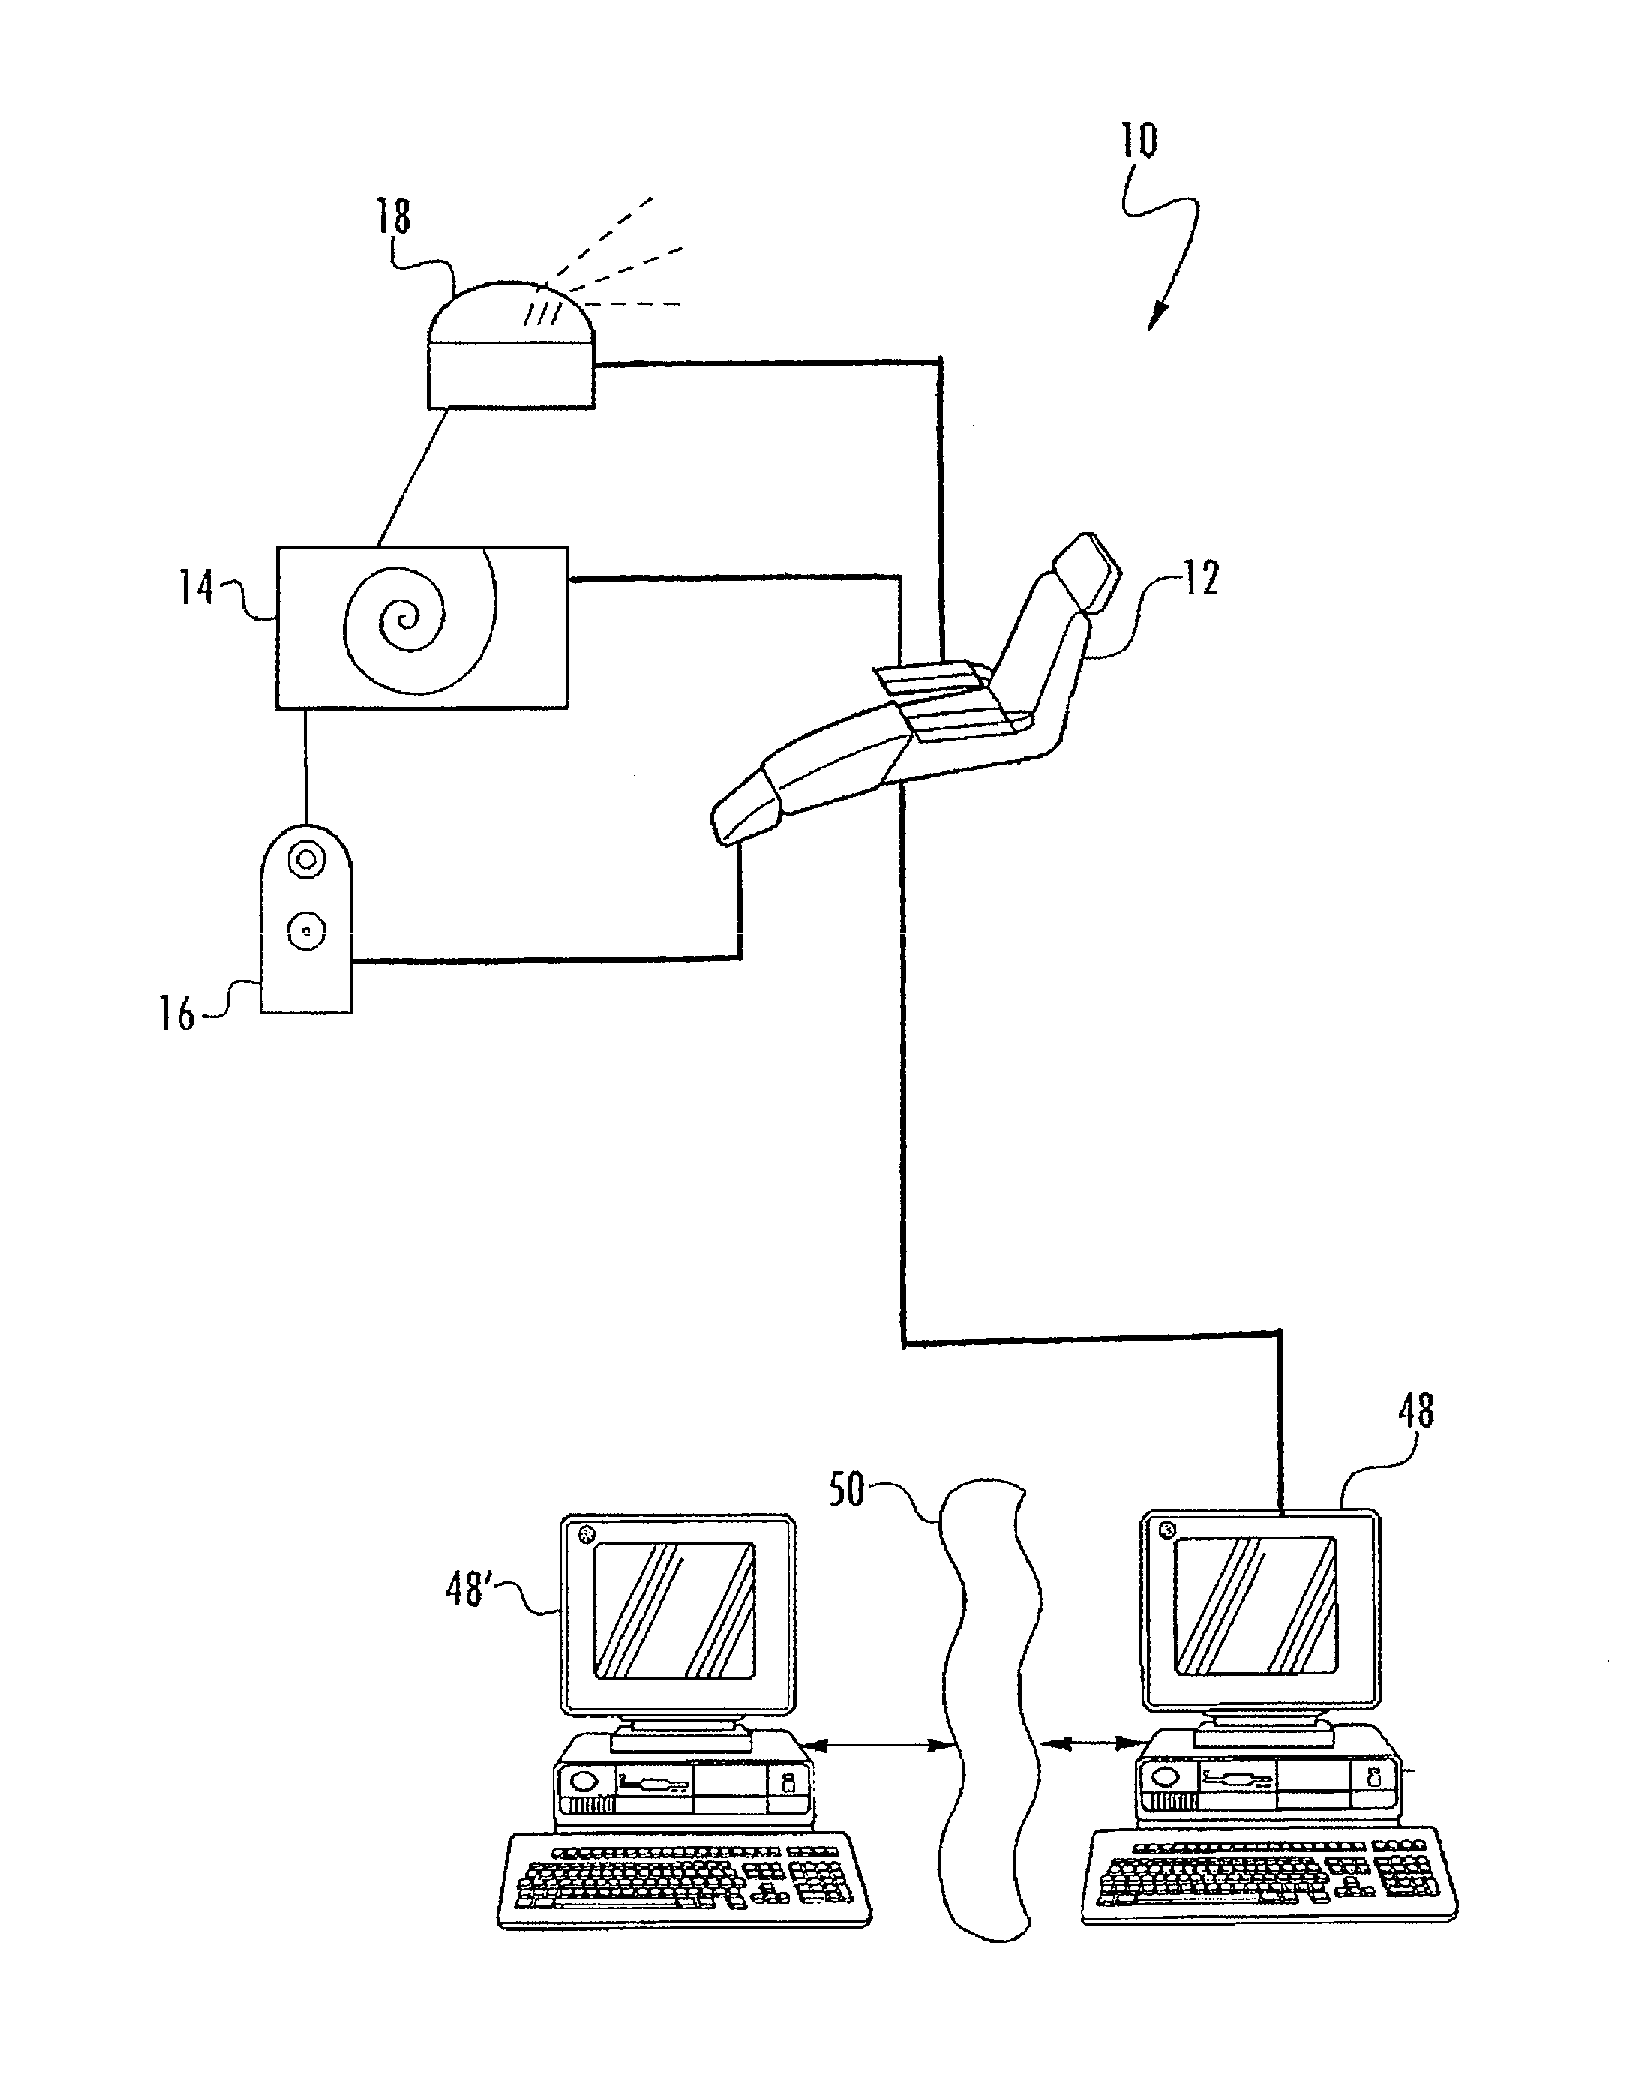 System and method for reducing stress levels using color, sound, and aroma therapy